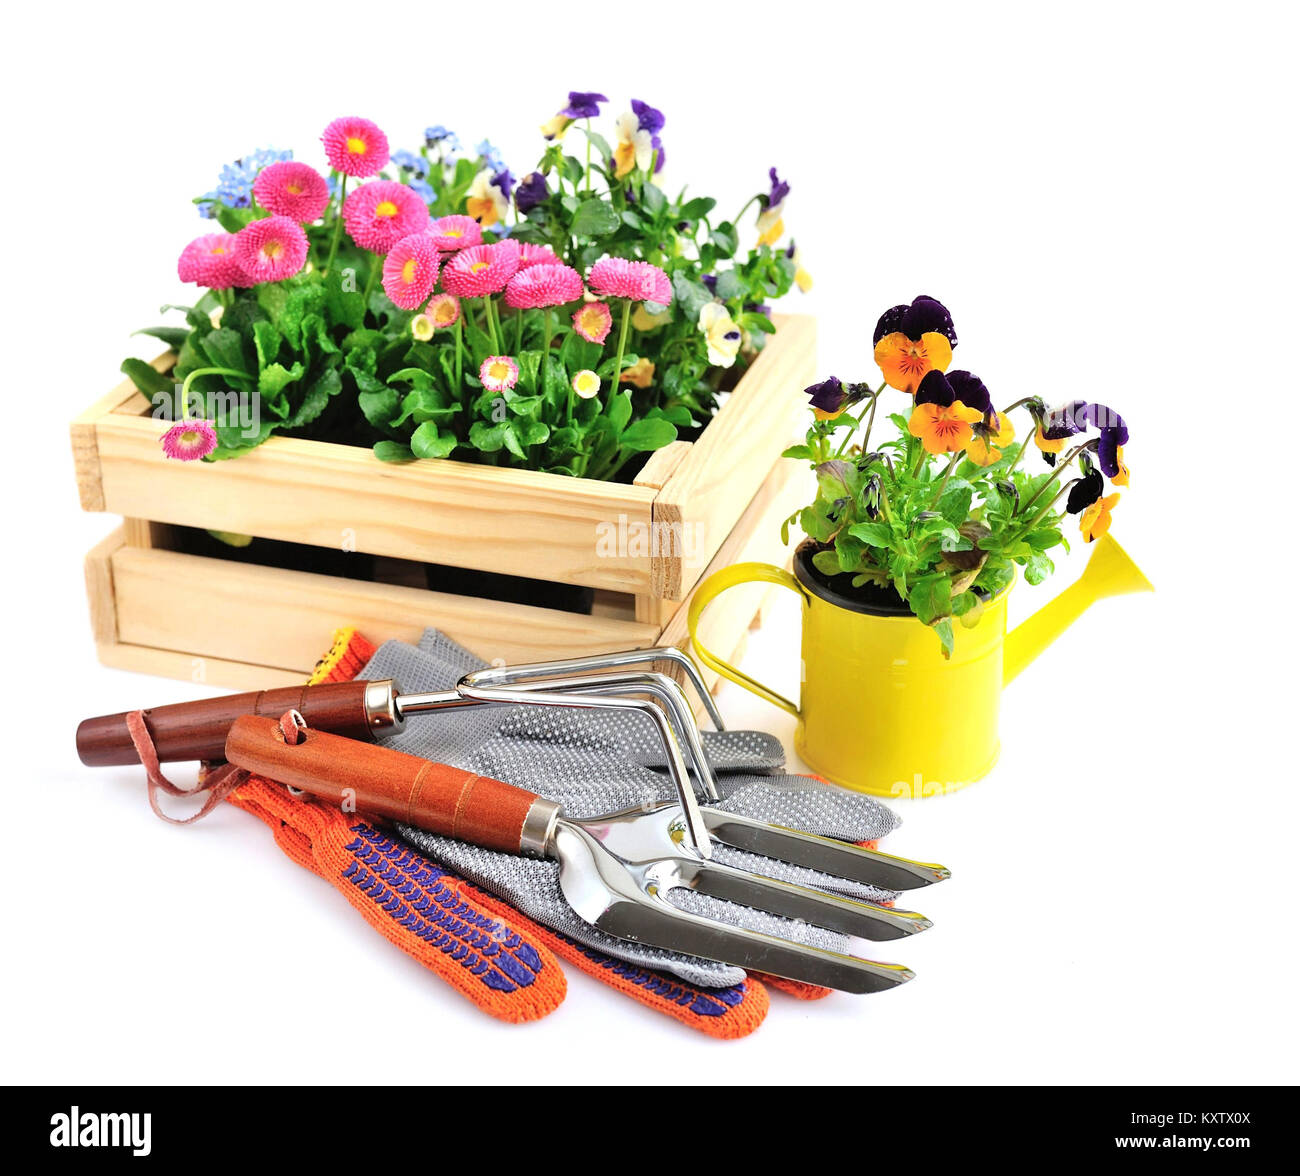 Gardening tools and spring flowers on a white background Stock Photo